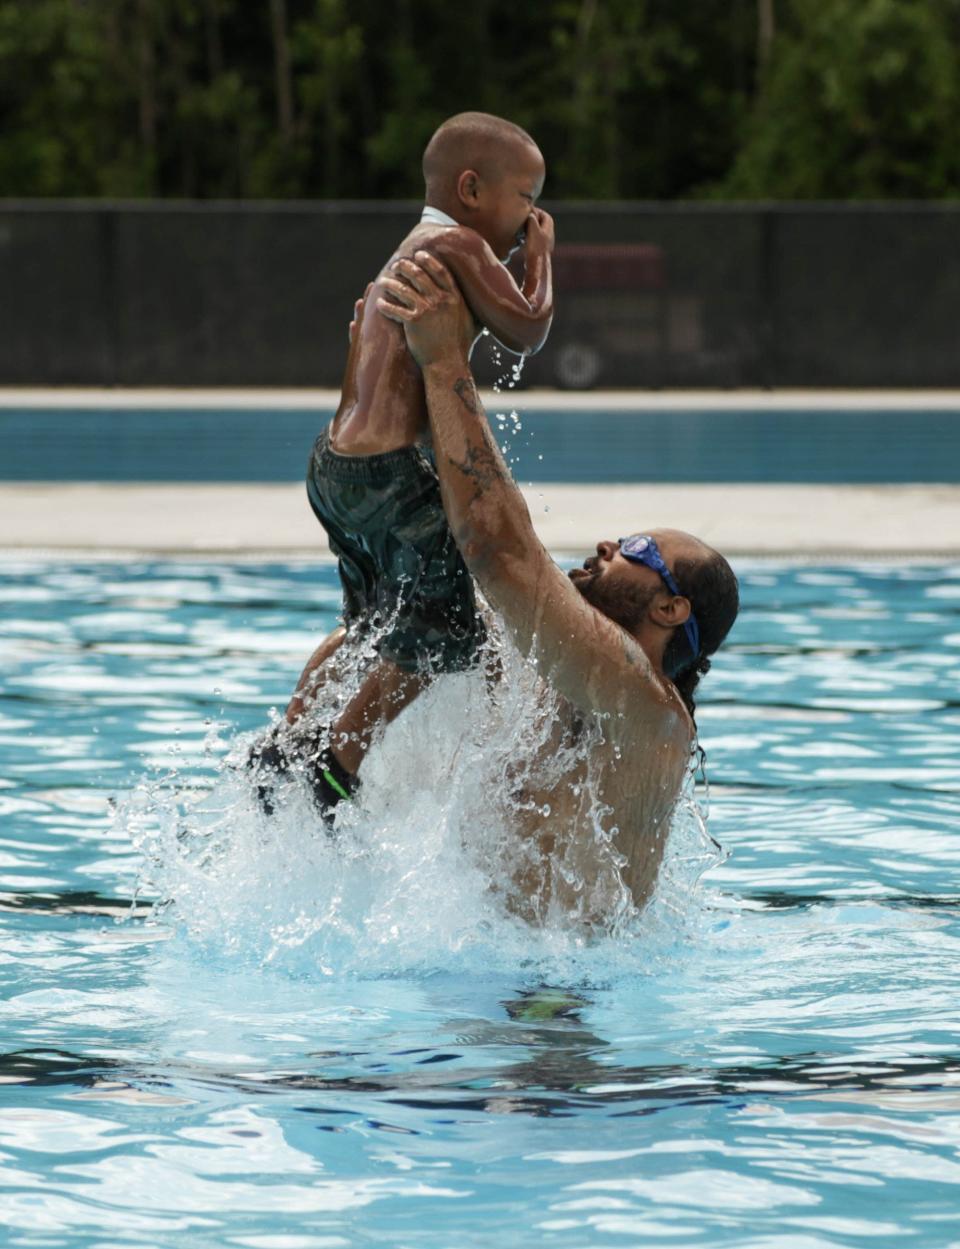 Counsel Gaynor of Detroit tosses his son Counsel Gaynor Jr 4 while on Wednesday July 9, 2014 after the grand re-opening of the two olympic-size swimming pools and bath house at the historic Brennan Pools located in Rouge Park on Detroit's west side. Ryan Garza / Detroit Free Press